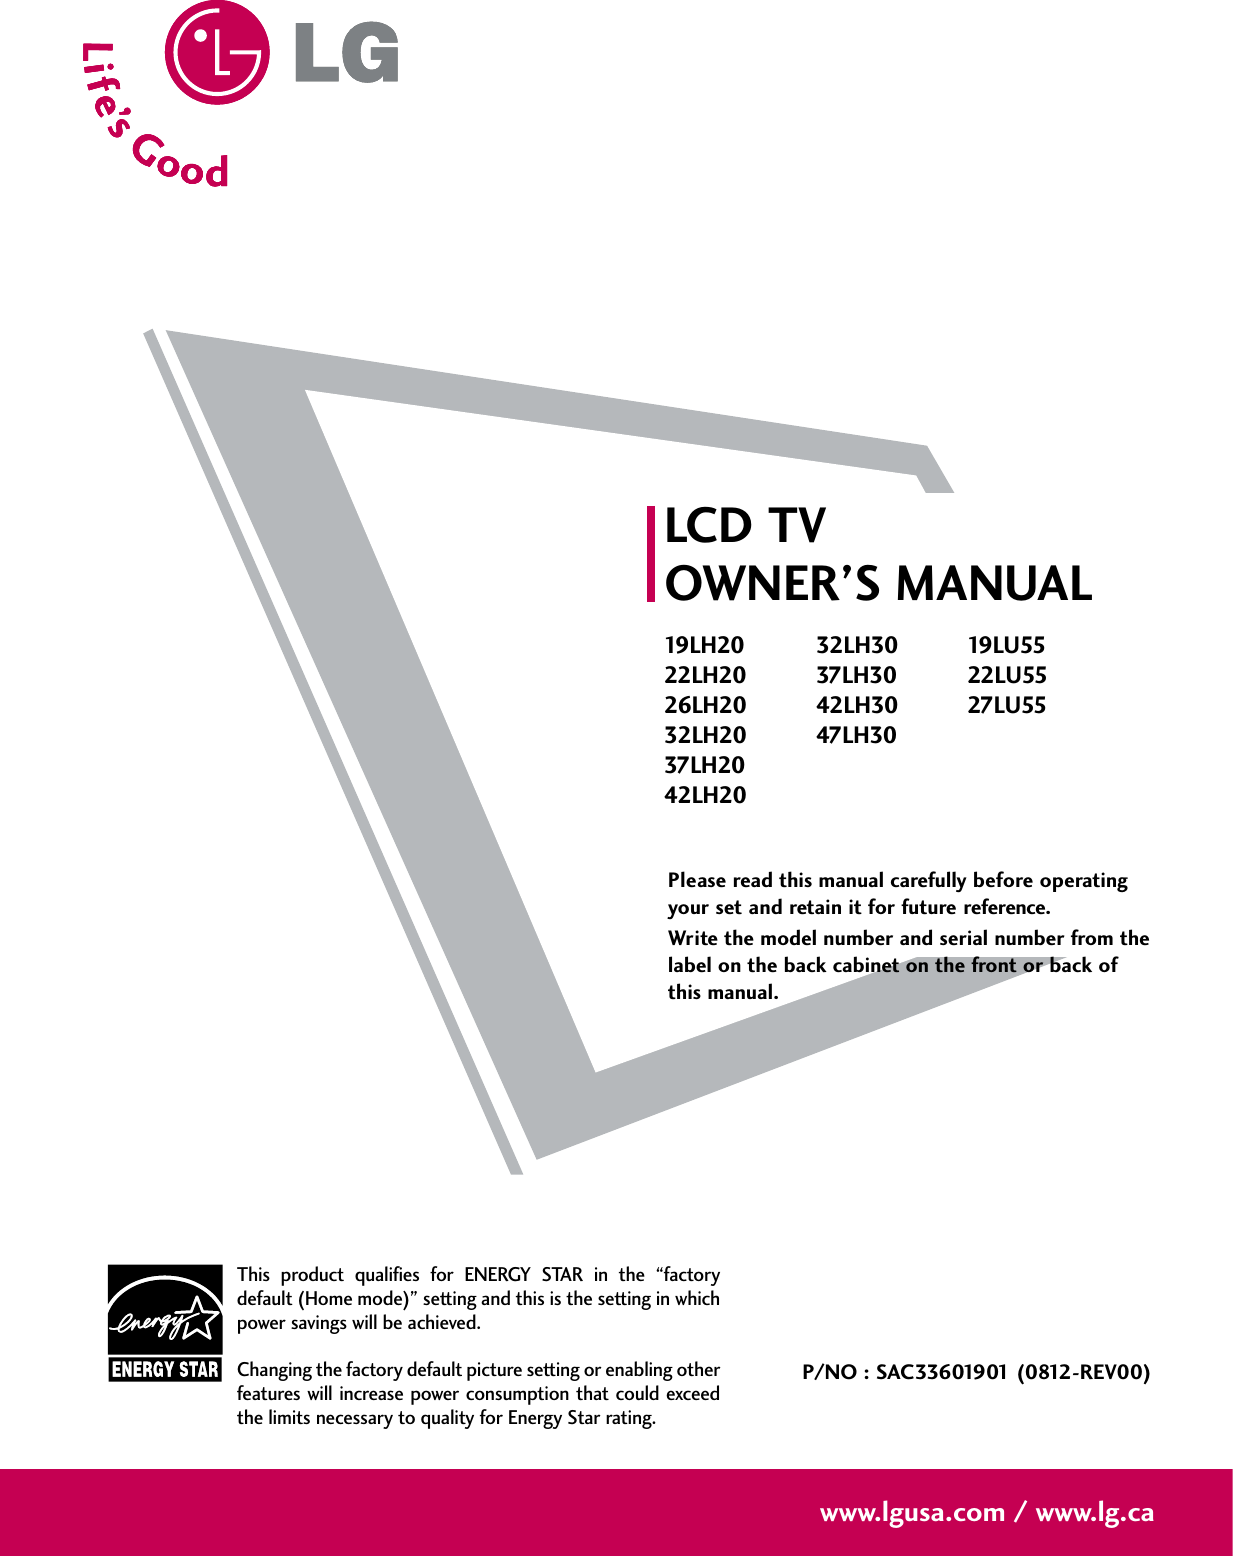 Please read this manual carefully before operatingyour set and retain it for future reference.Write the model number and serial number from thelabel on the back cabinet on the front or back ofthis manual. LCD TVOWNER’S MANUAL19LH2022LH2026LH2032LH2037LH2042LH2032LH3037LH3042LH3047LH3019LU5522LU5527LU55P/NO : SAC33601901 (0812-REV00)www.lgusa.com / www.lg.caThis product qualifies for ENERGY STAR in the “factorydefault (Home mode)” setting and this is the setting in whichpower savings will be achieved.Changing the factory default picture setting or enabling otherfeatures will increase power consumption that could exceedthe limits necessary to quality for Energy Star rating.